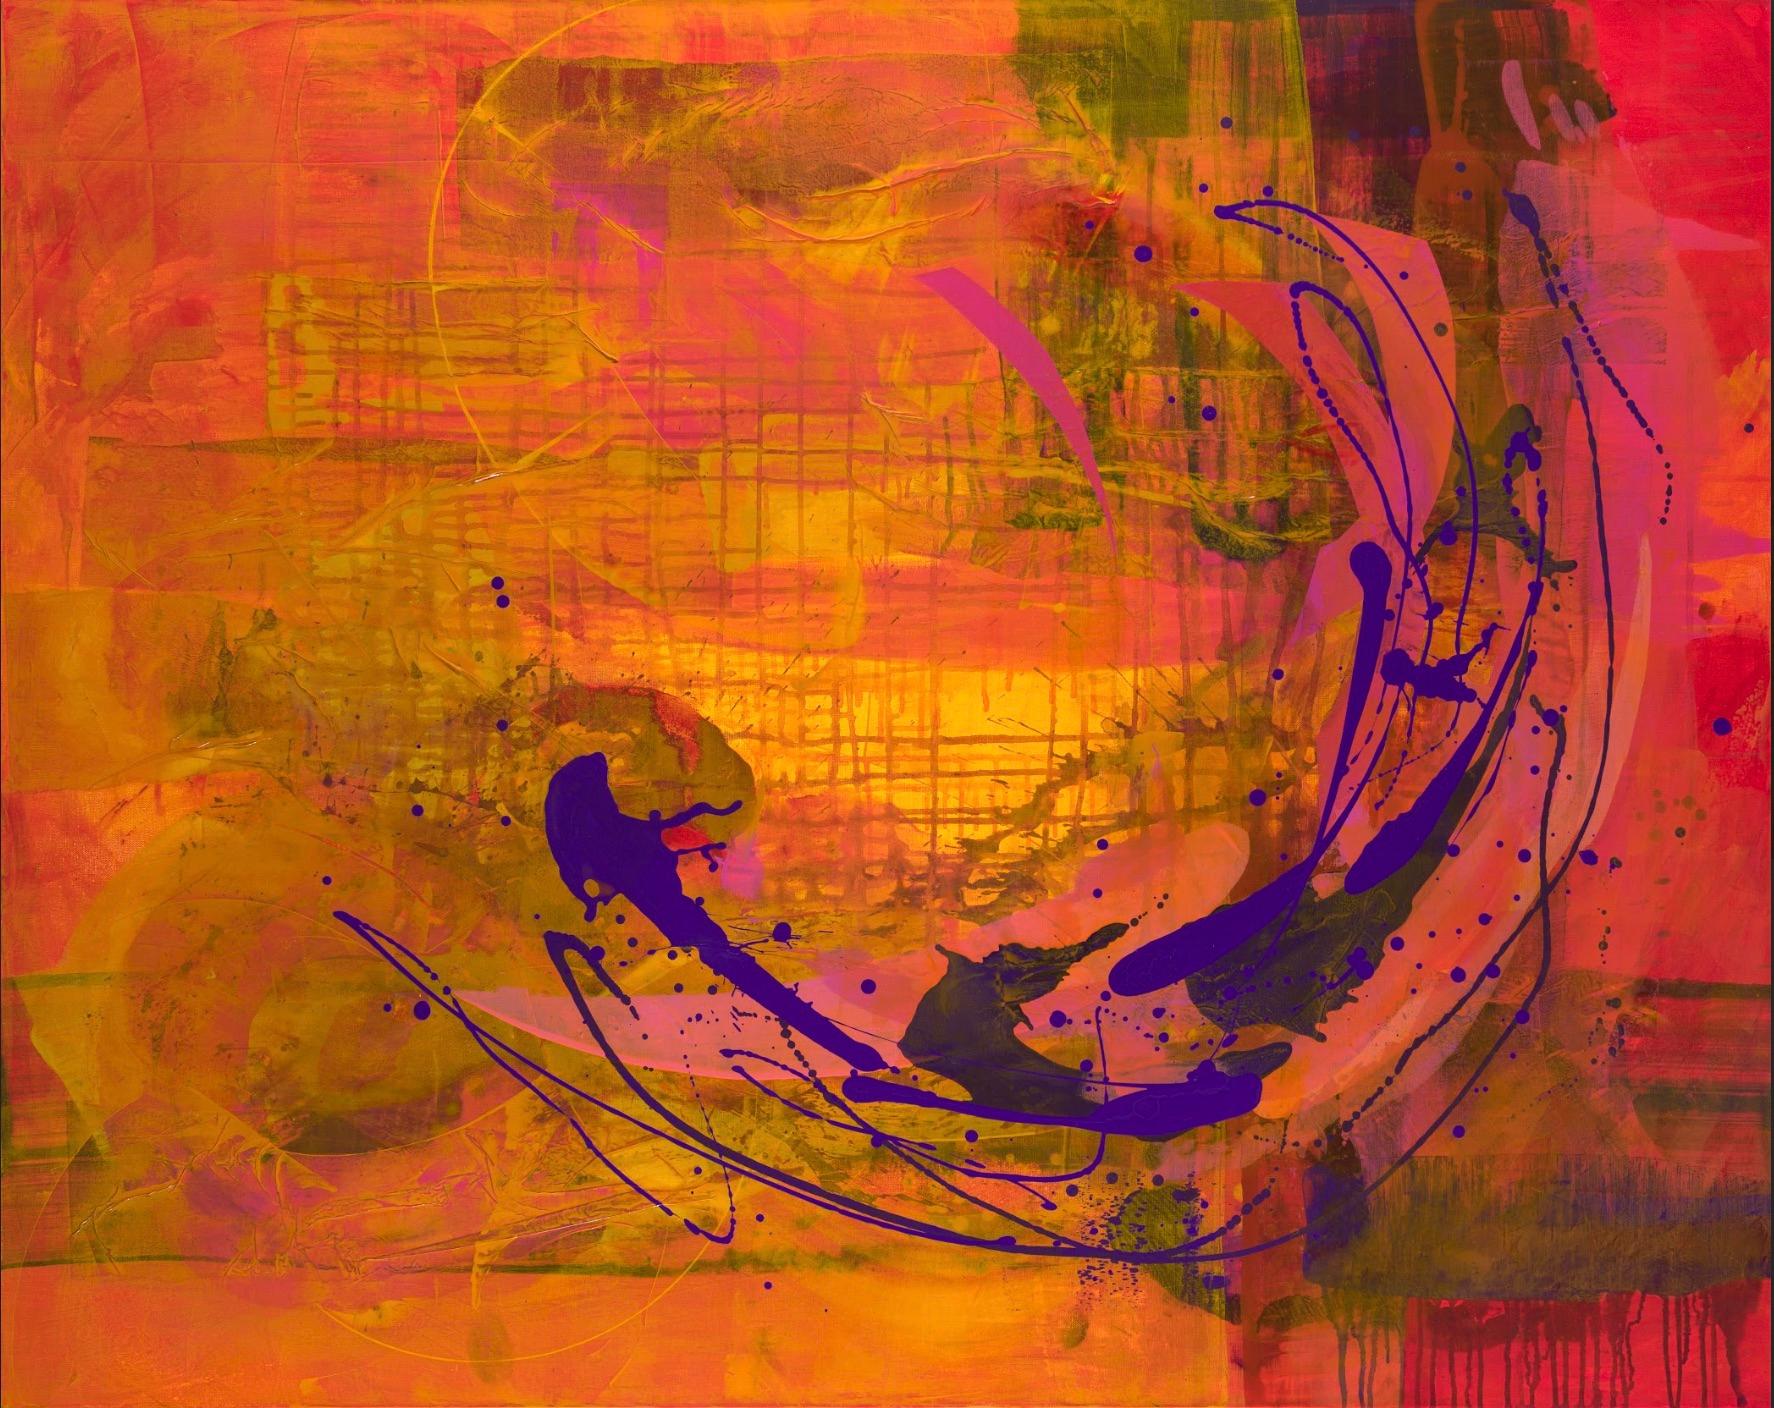 Lorraine Lawson Abstract Painting - 'Passion' - Vibrant Textured Abstract - Mixed Media Abstract Expressionist